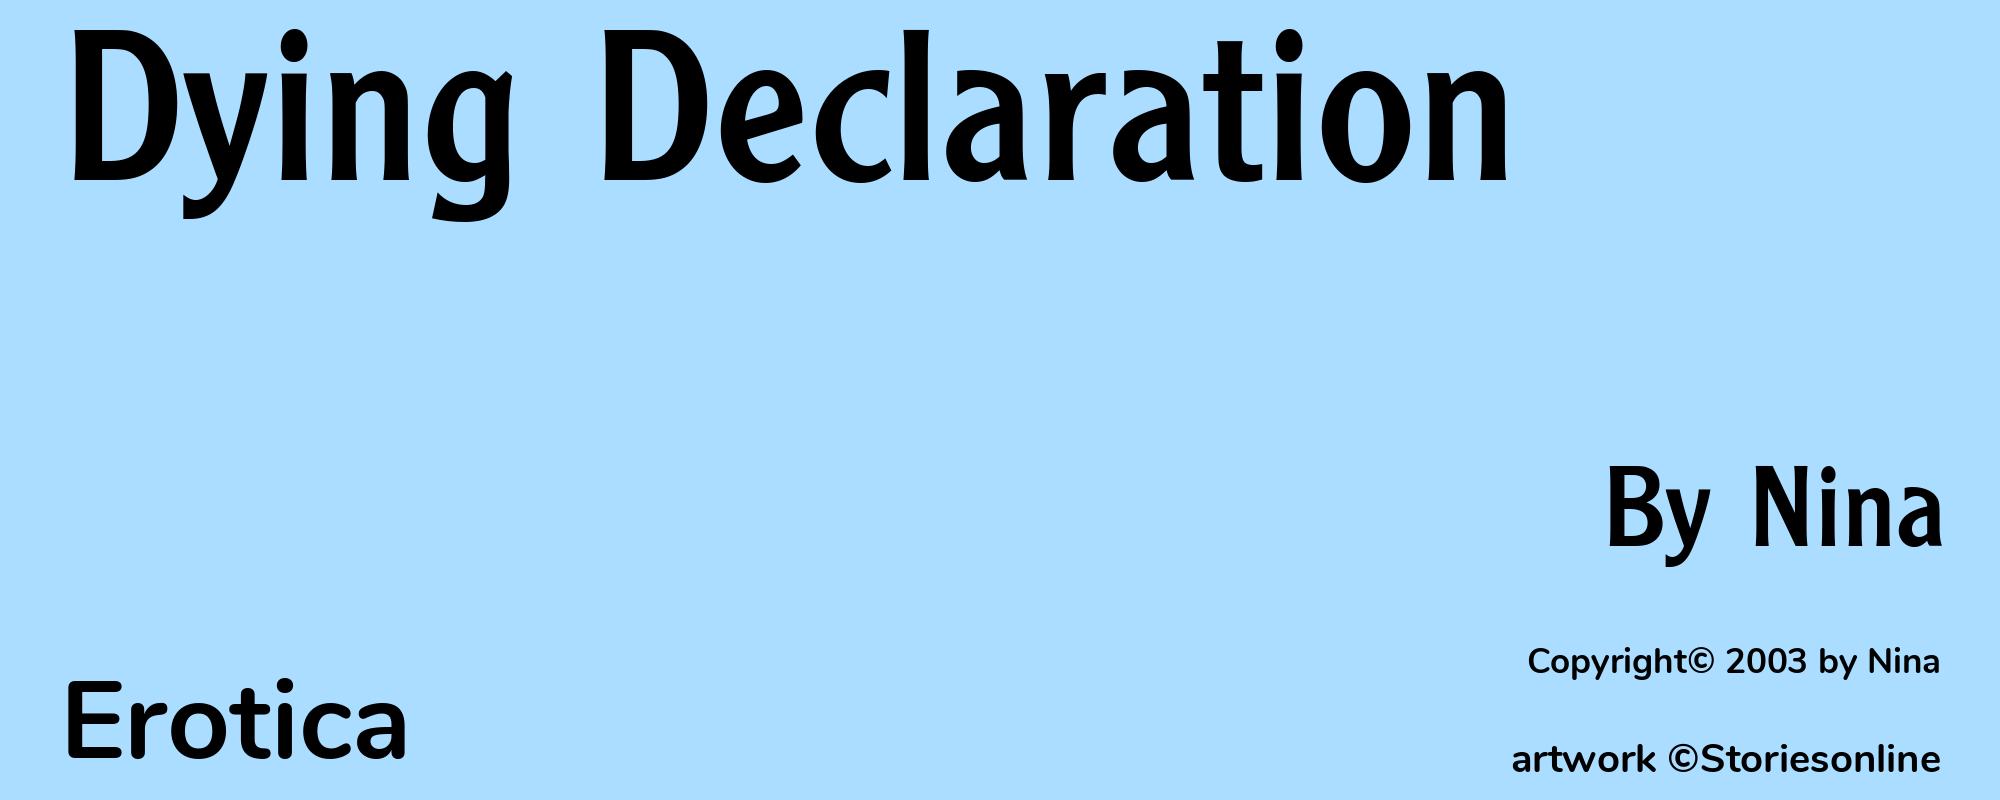 Dying Declaration - Cover